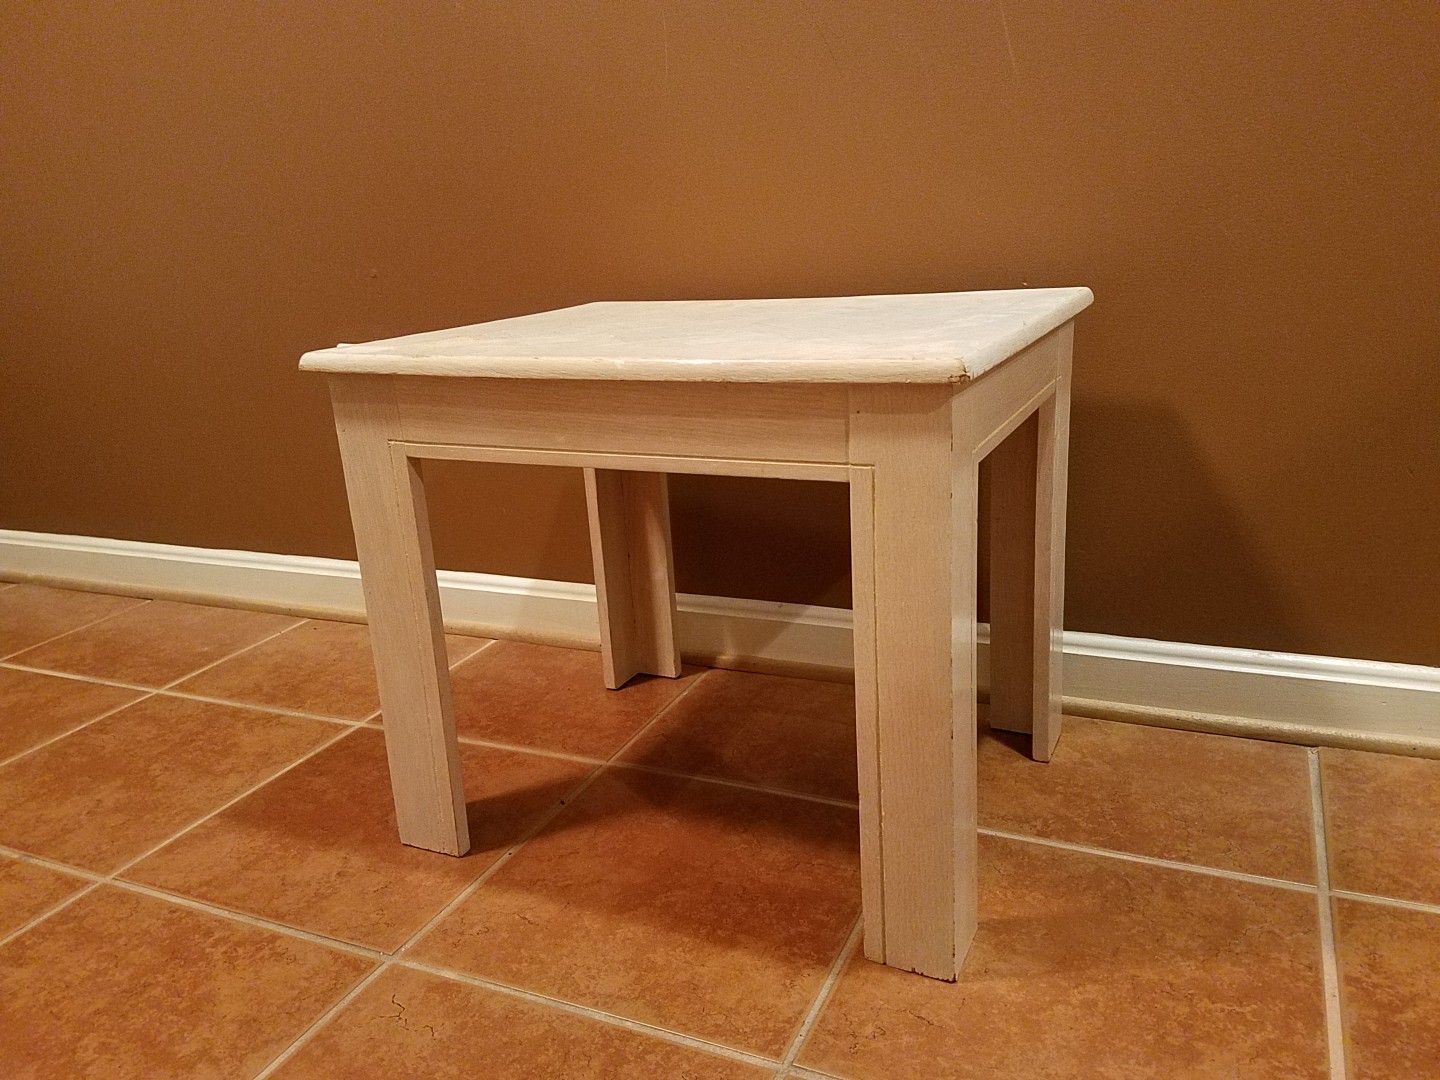 WHITE WOODEN END TABLE